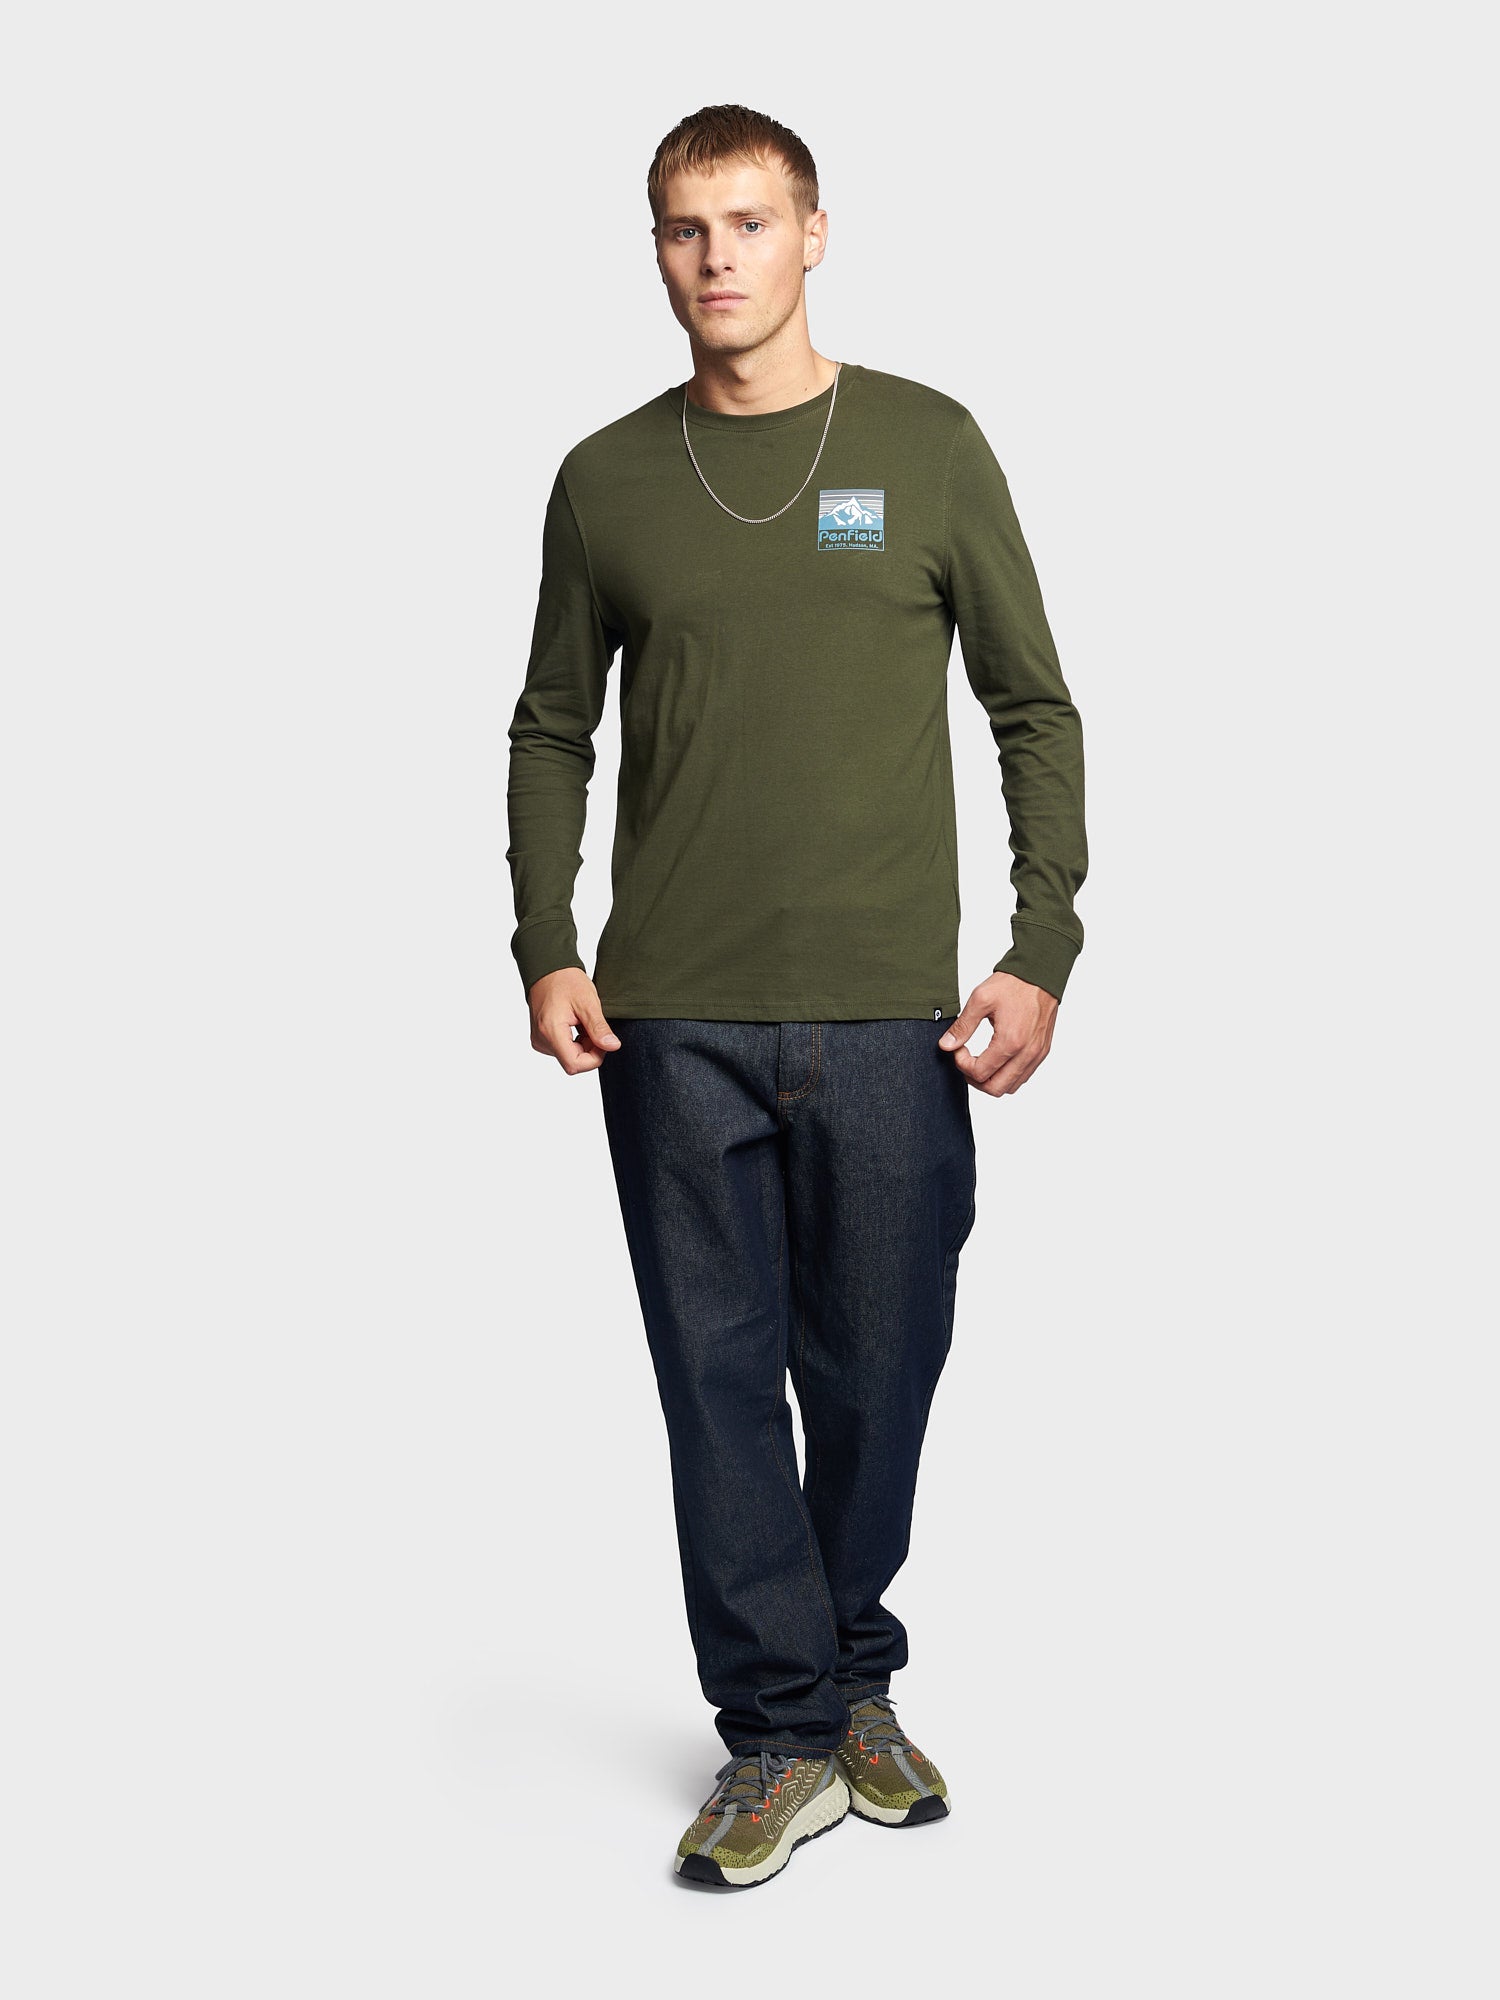 Penfield Back Graphic LS T-Shirt Forest Night